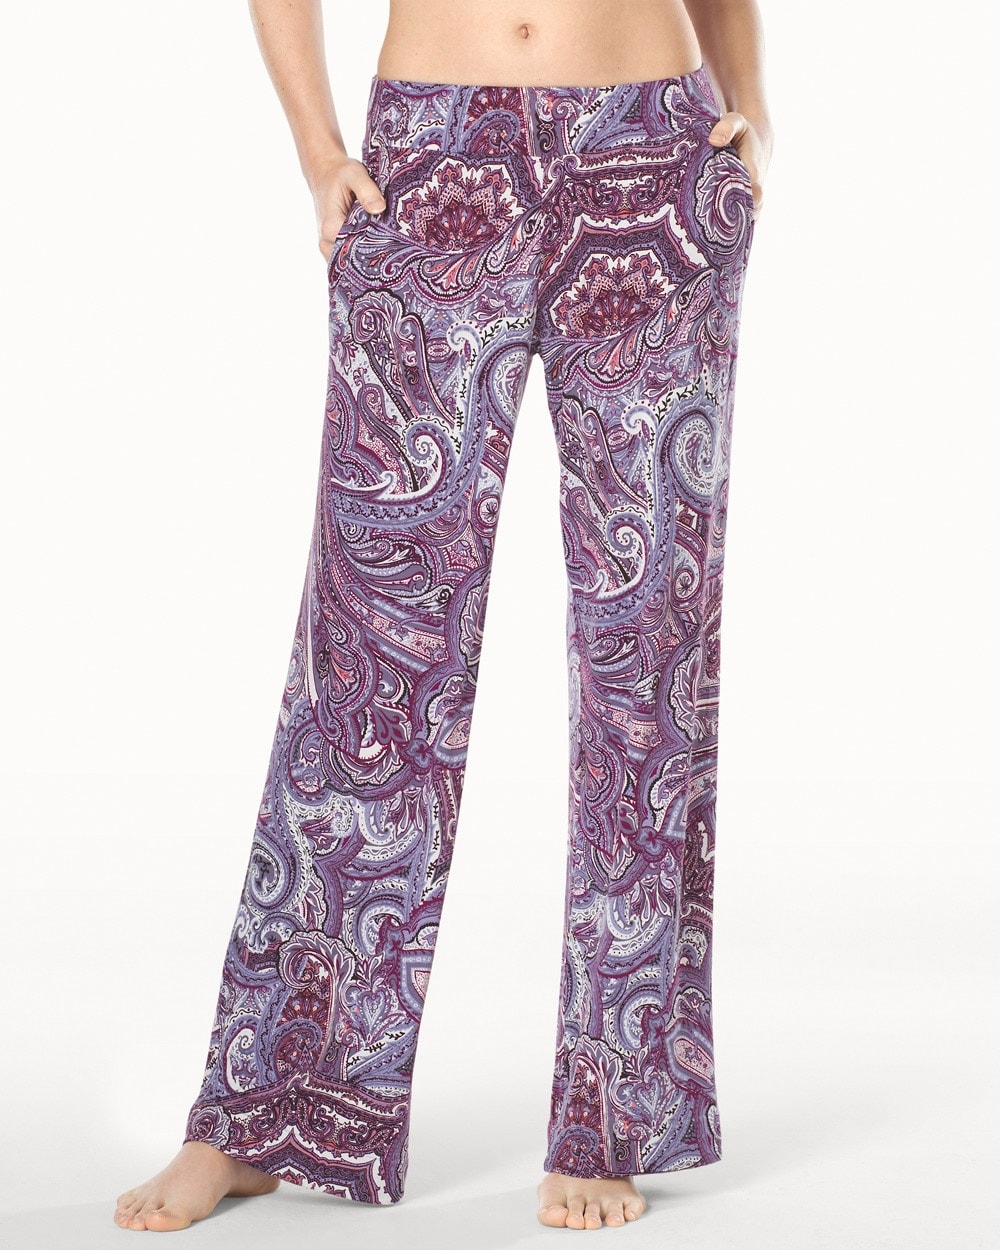 Embraceable Cool Nights Tall Inseam Pajama Pants Fanciful Scroll Grape